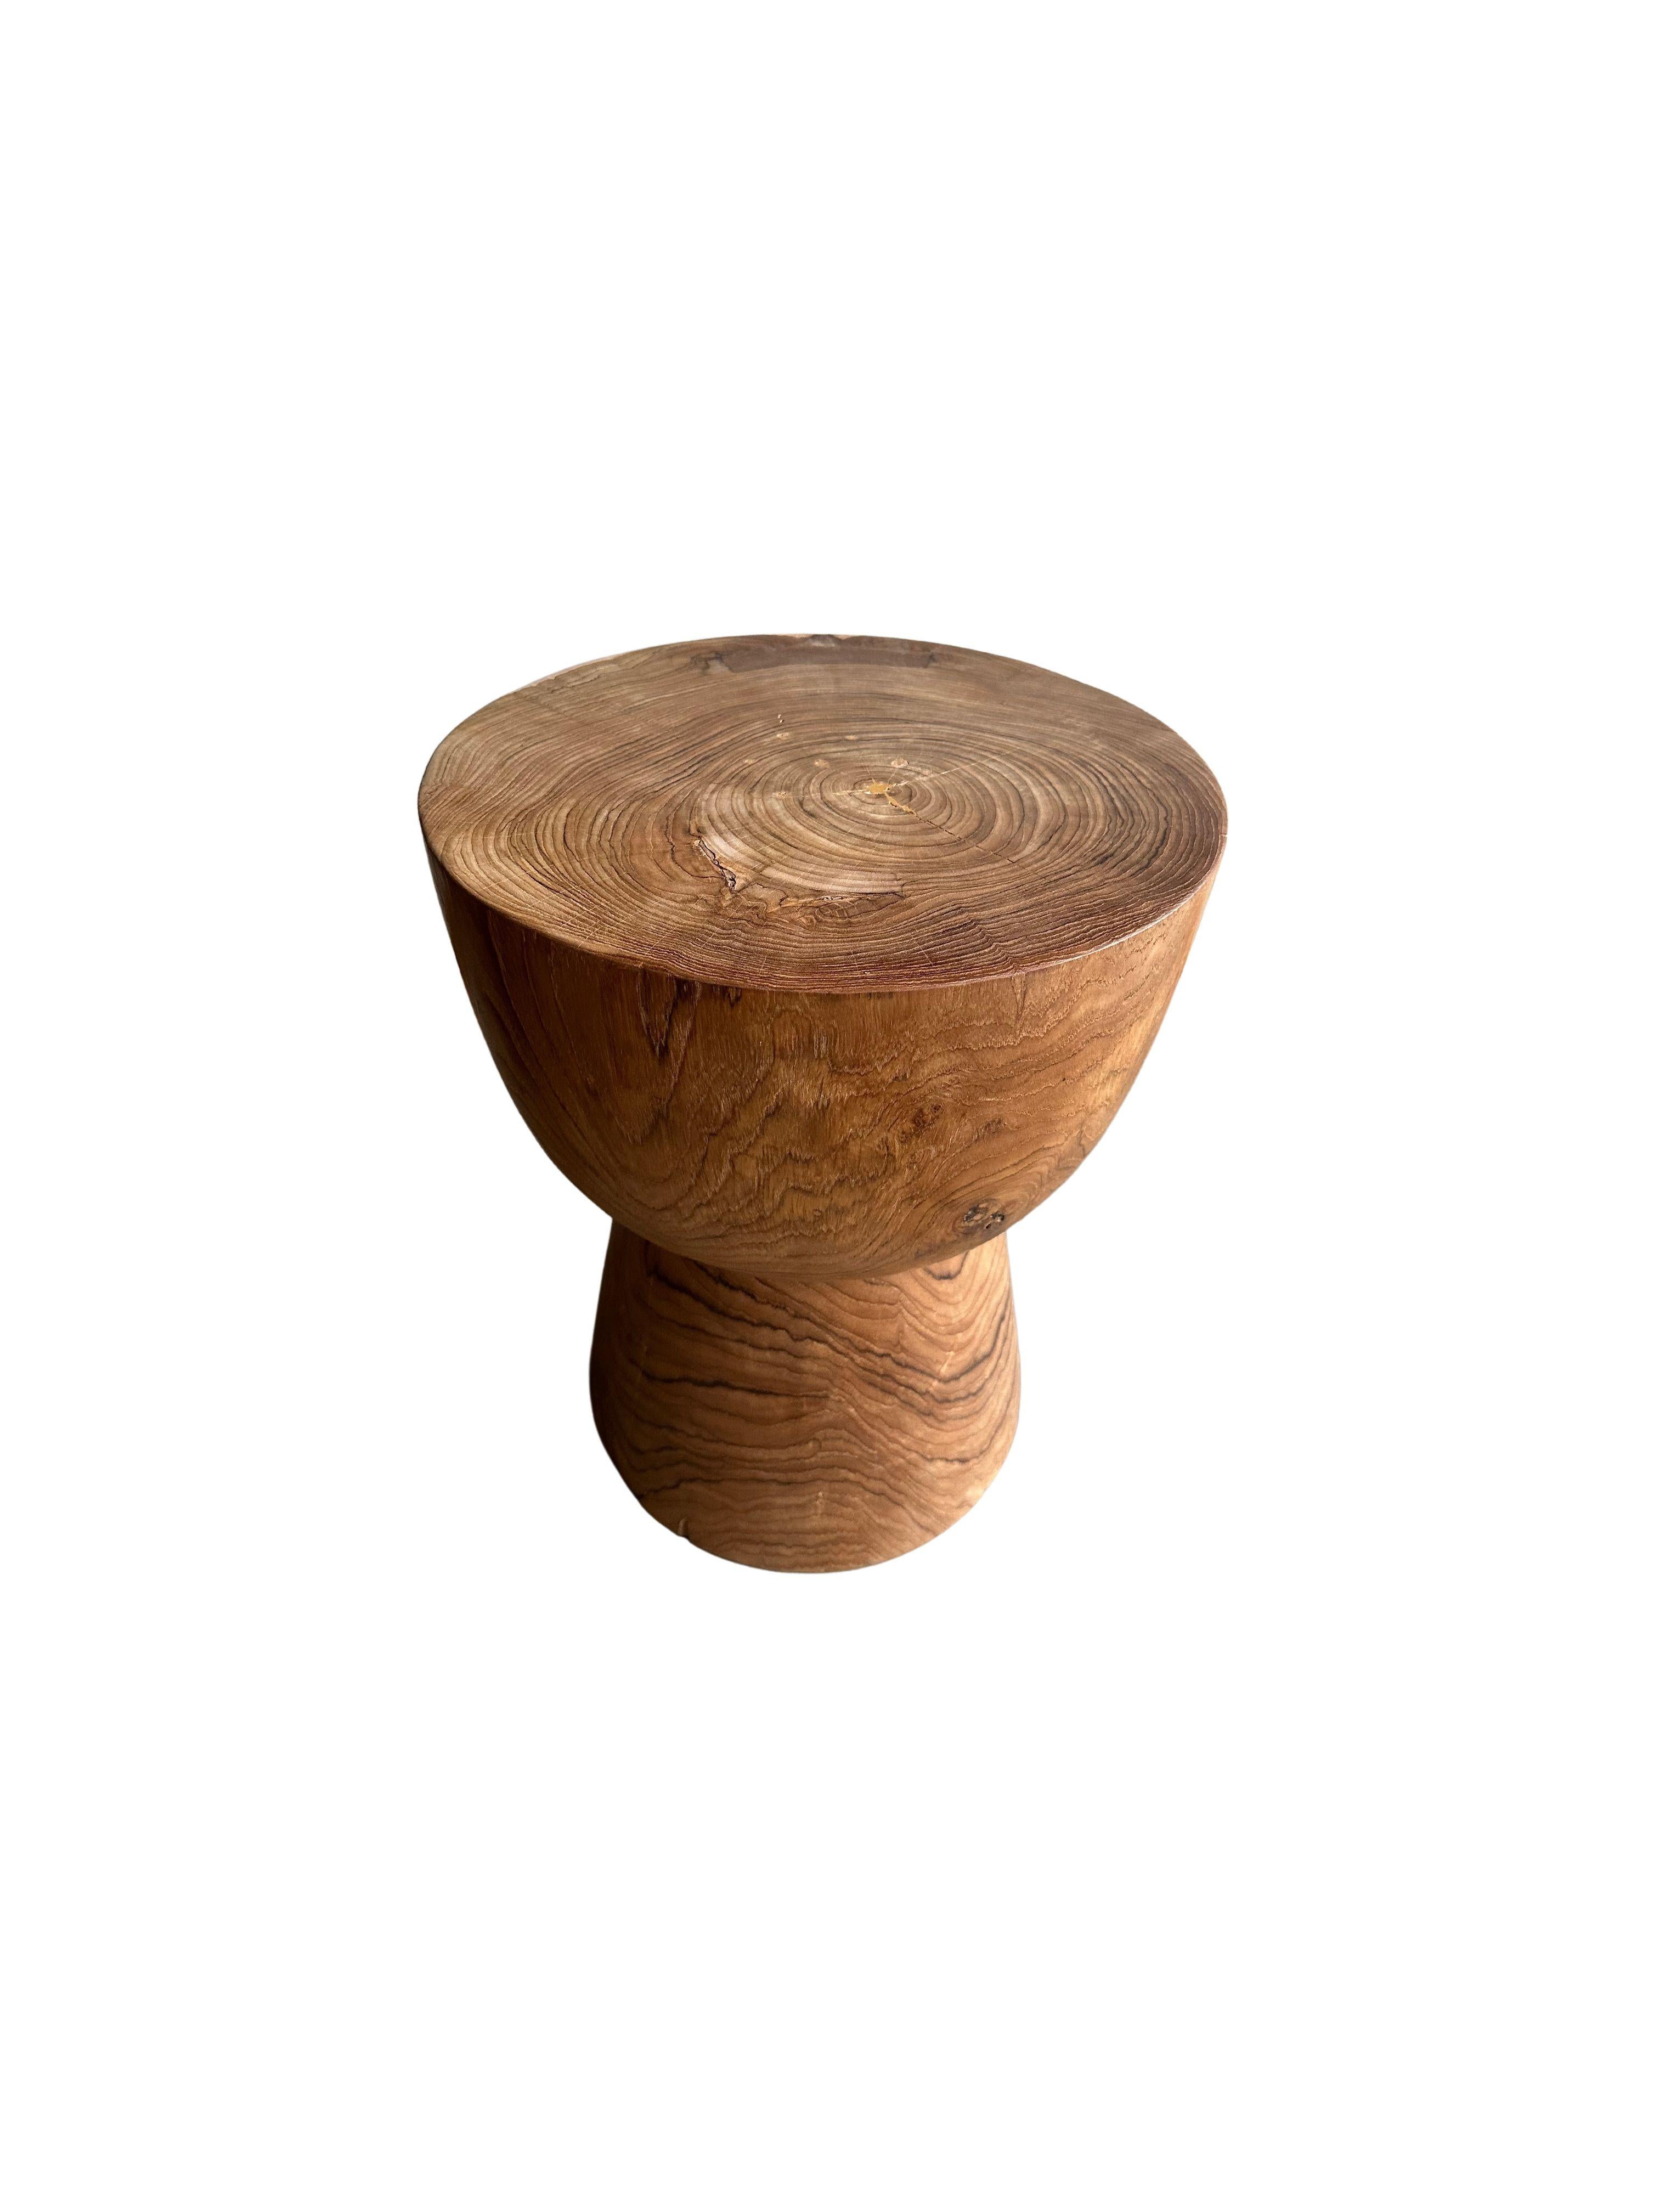 Contemporary Sculptural Teak Wood Side Table, with Stunning Wood Textures, Modern Organic